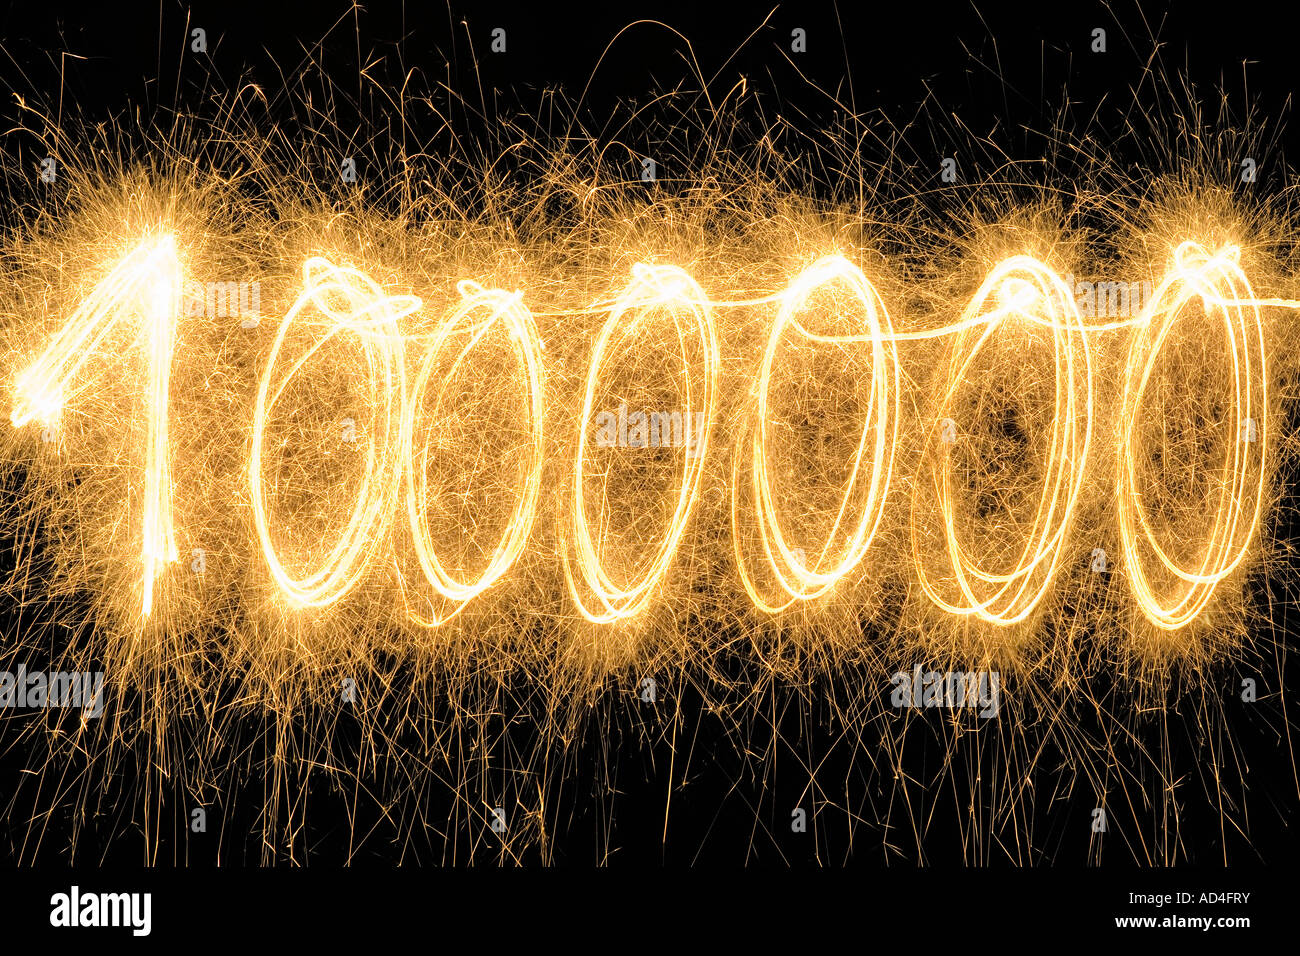 1000000' drawn with a sparkler Stock Photo